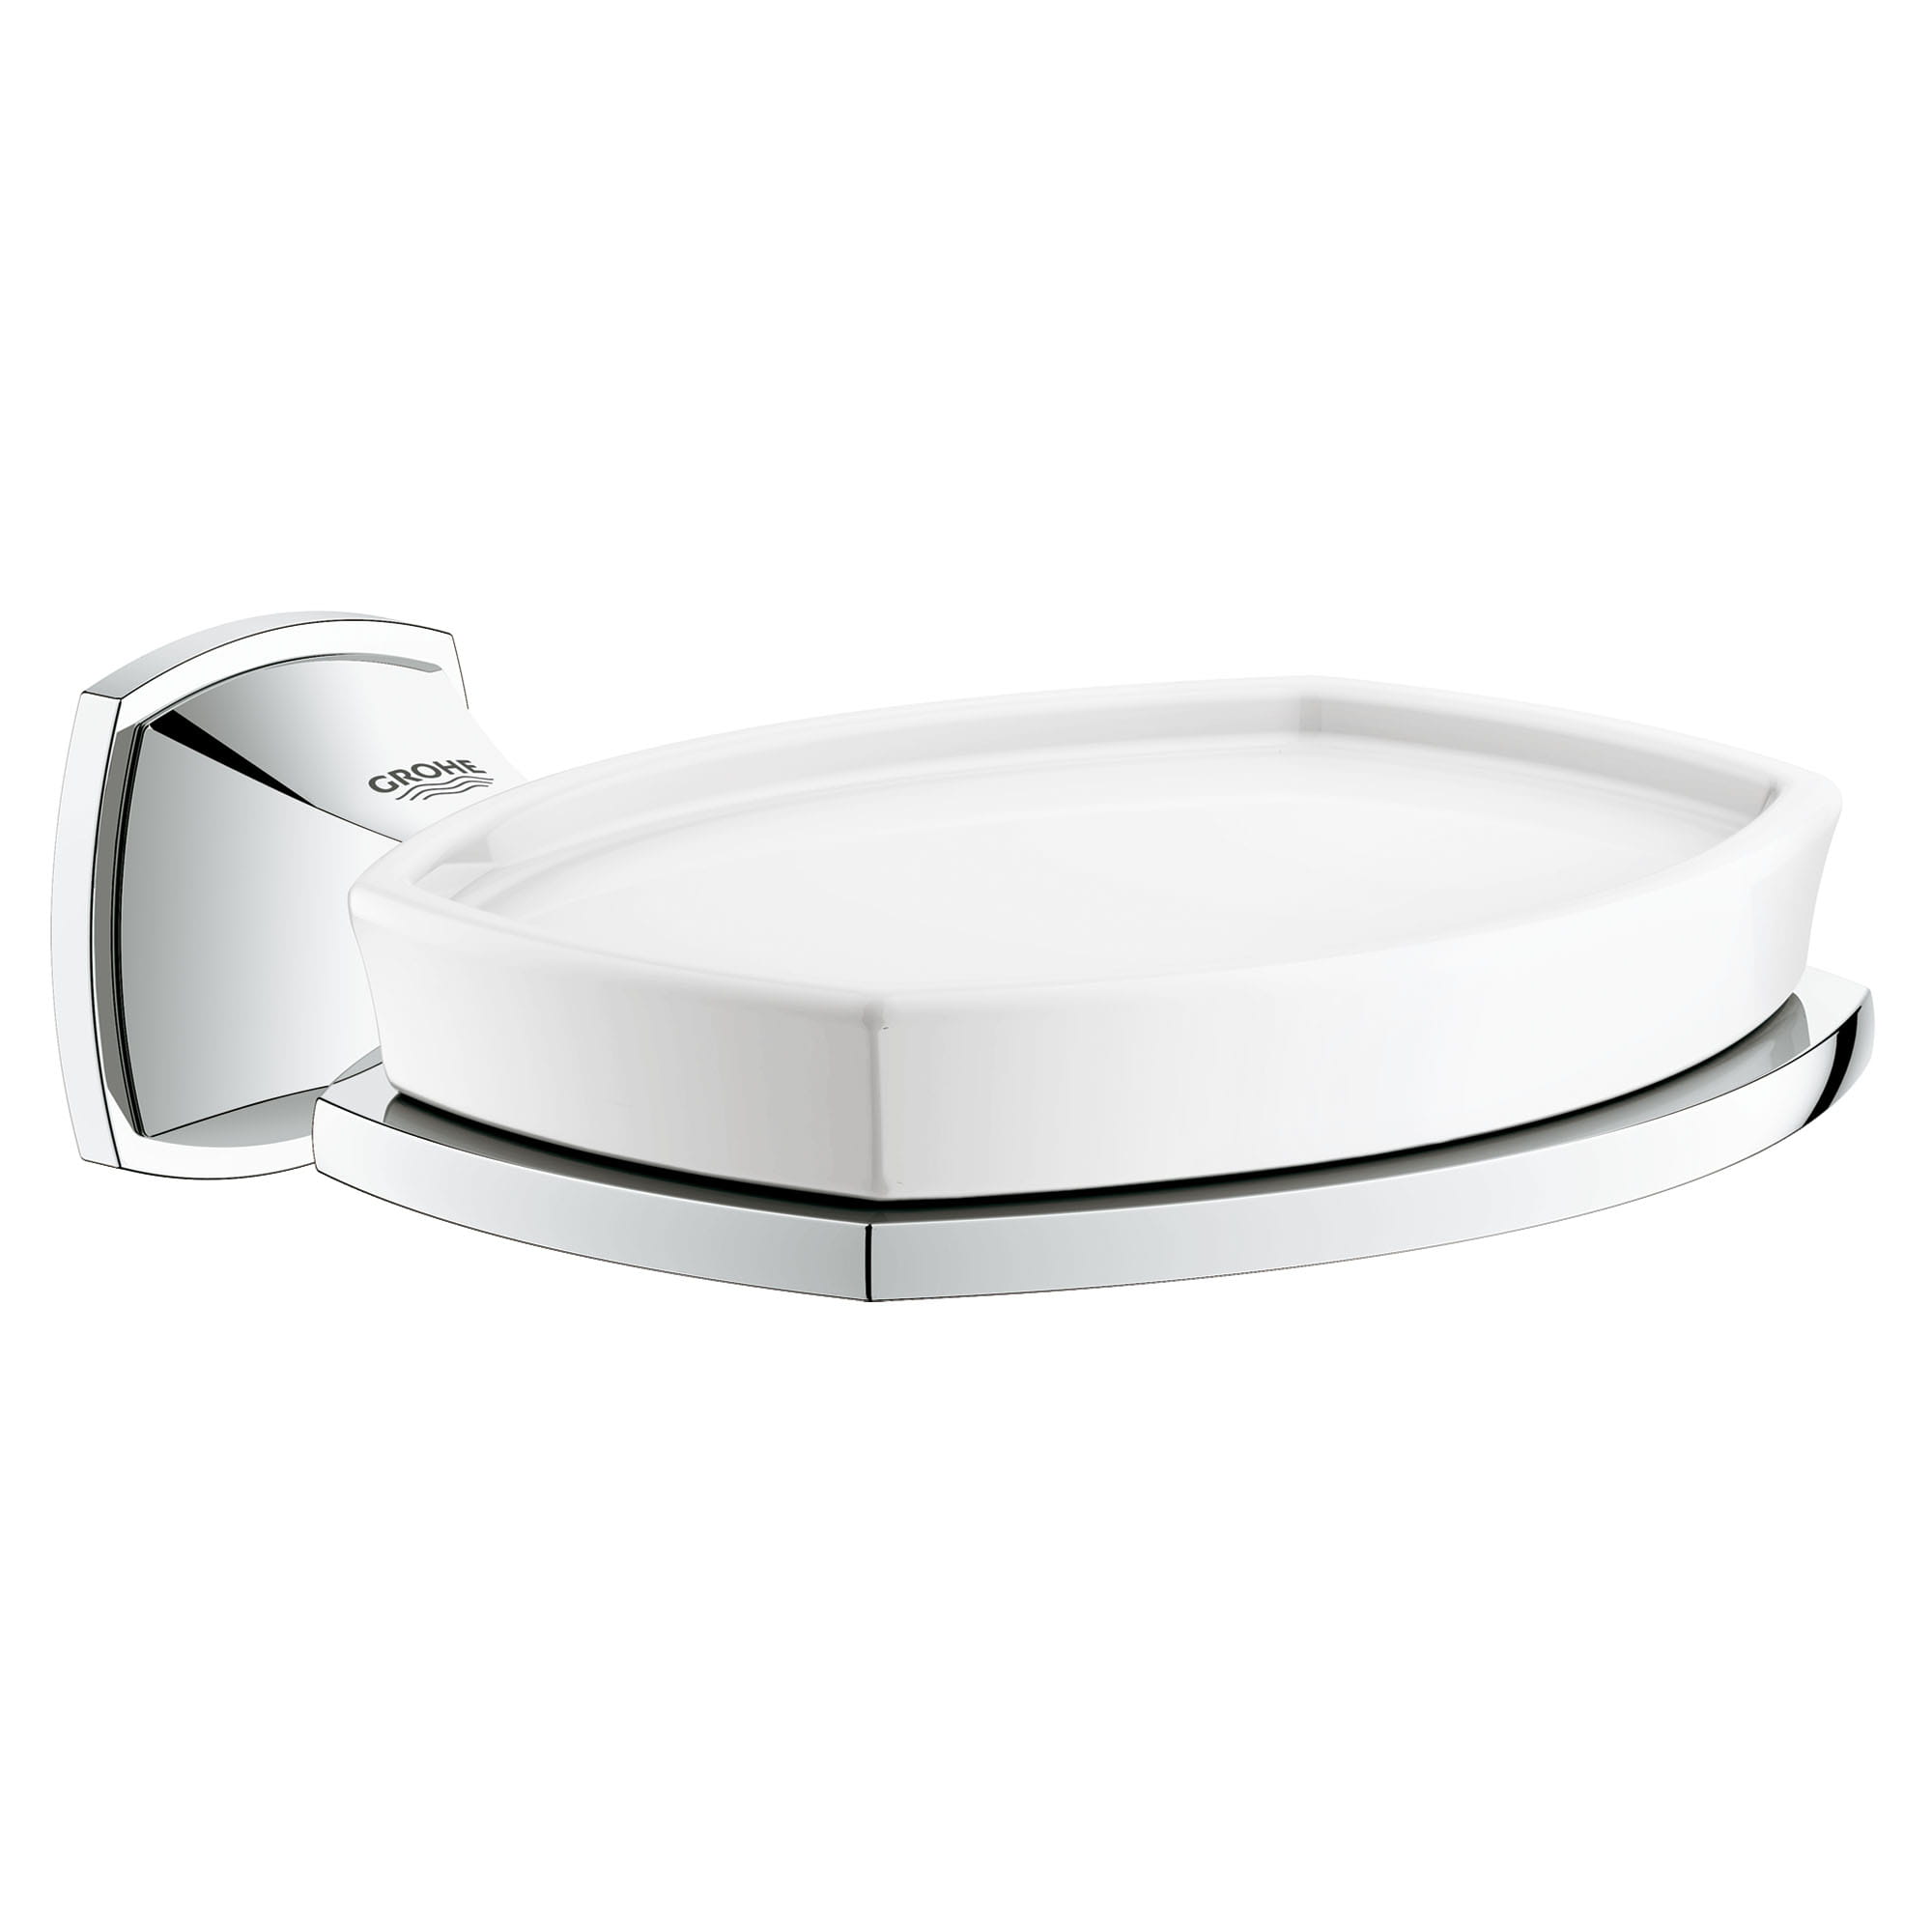 Ceramic Soap Dish with Holder GROHE CHROME